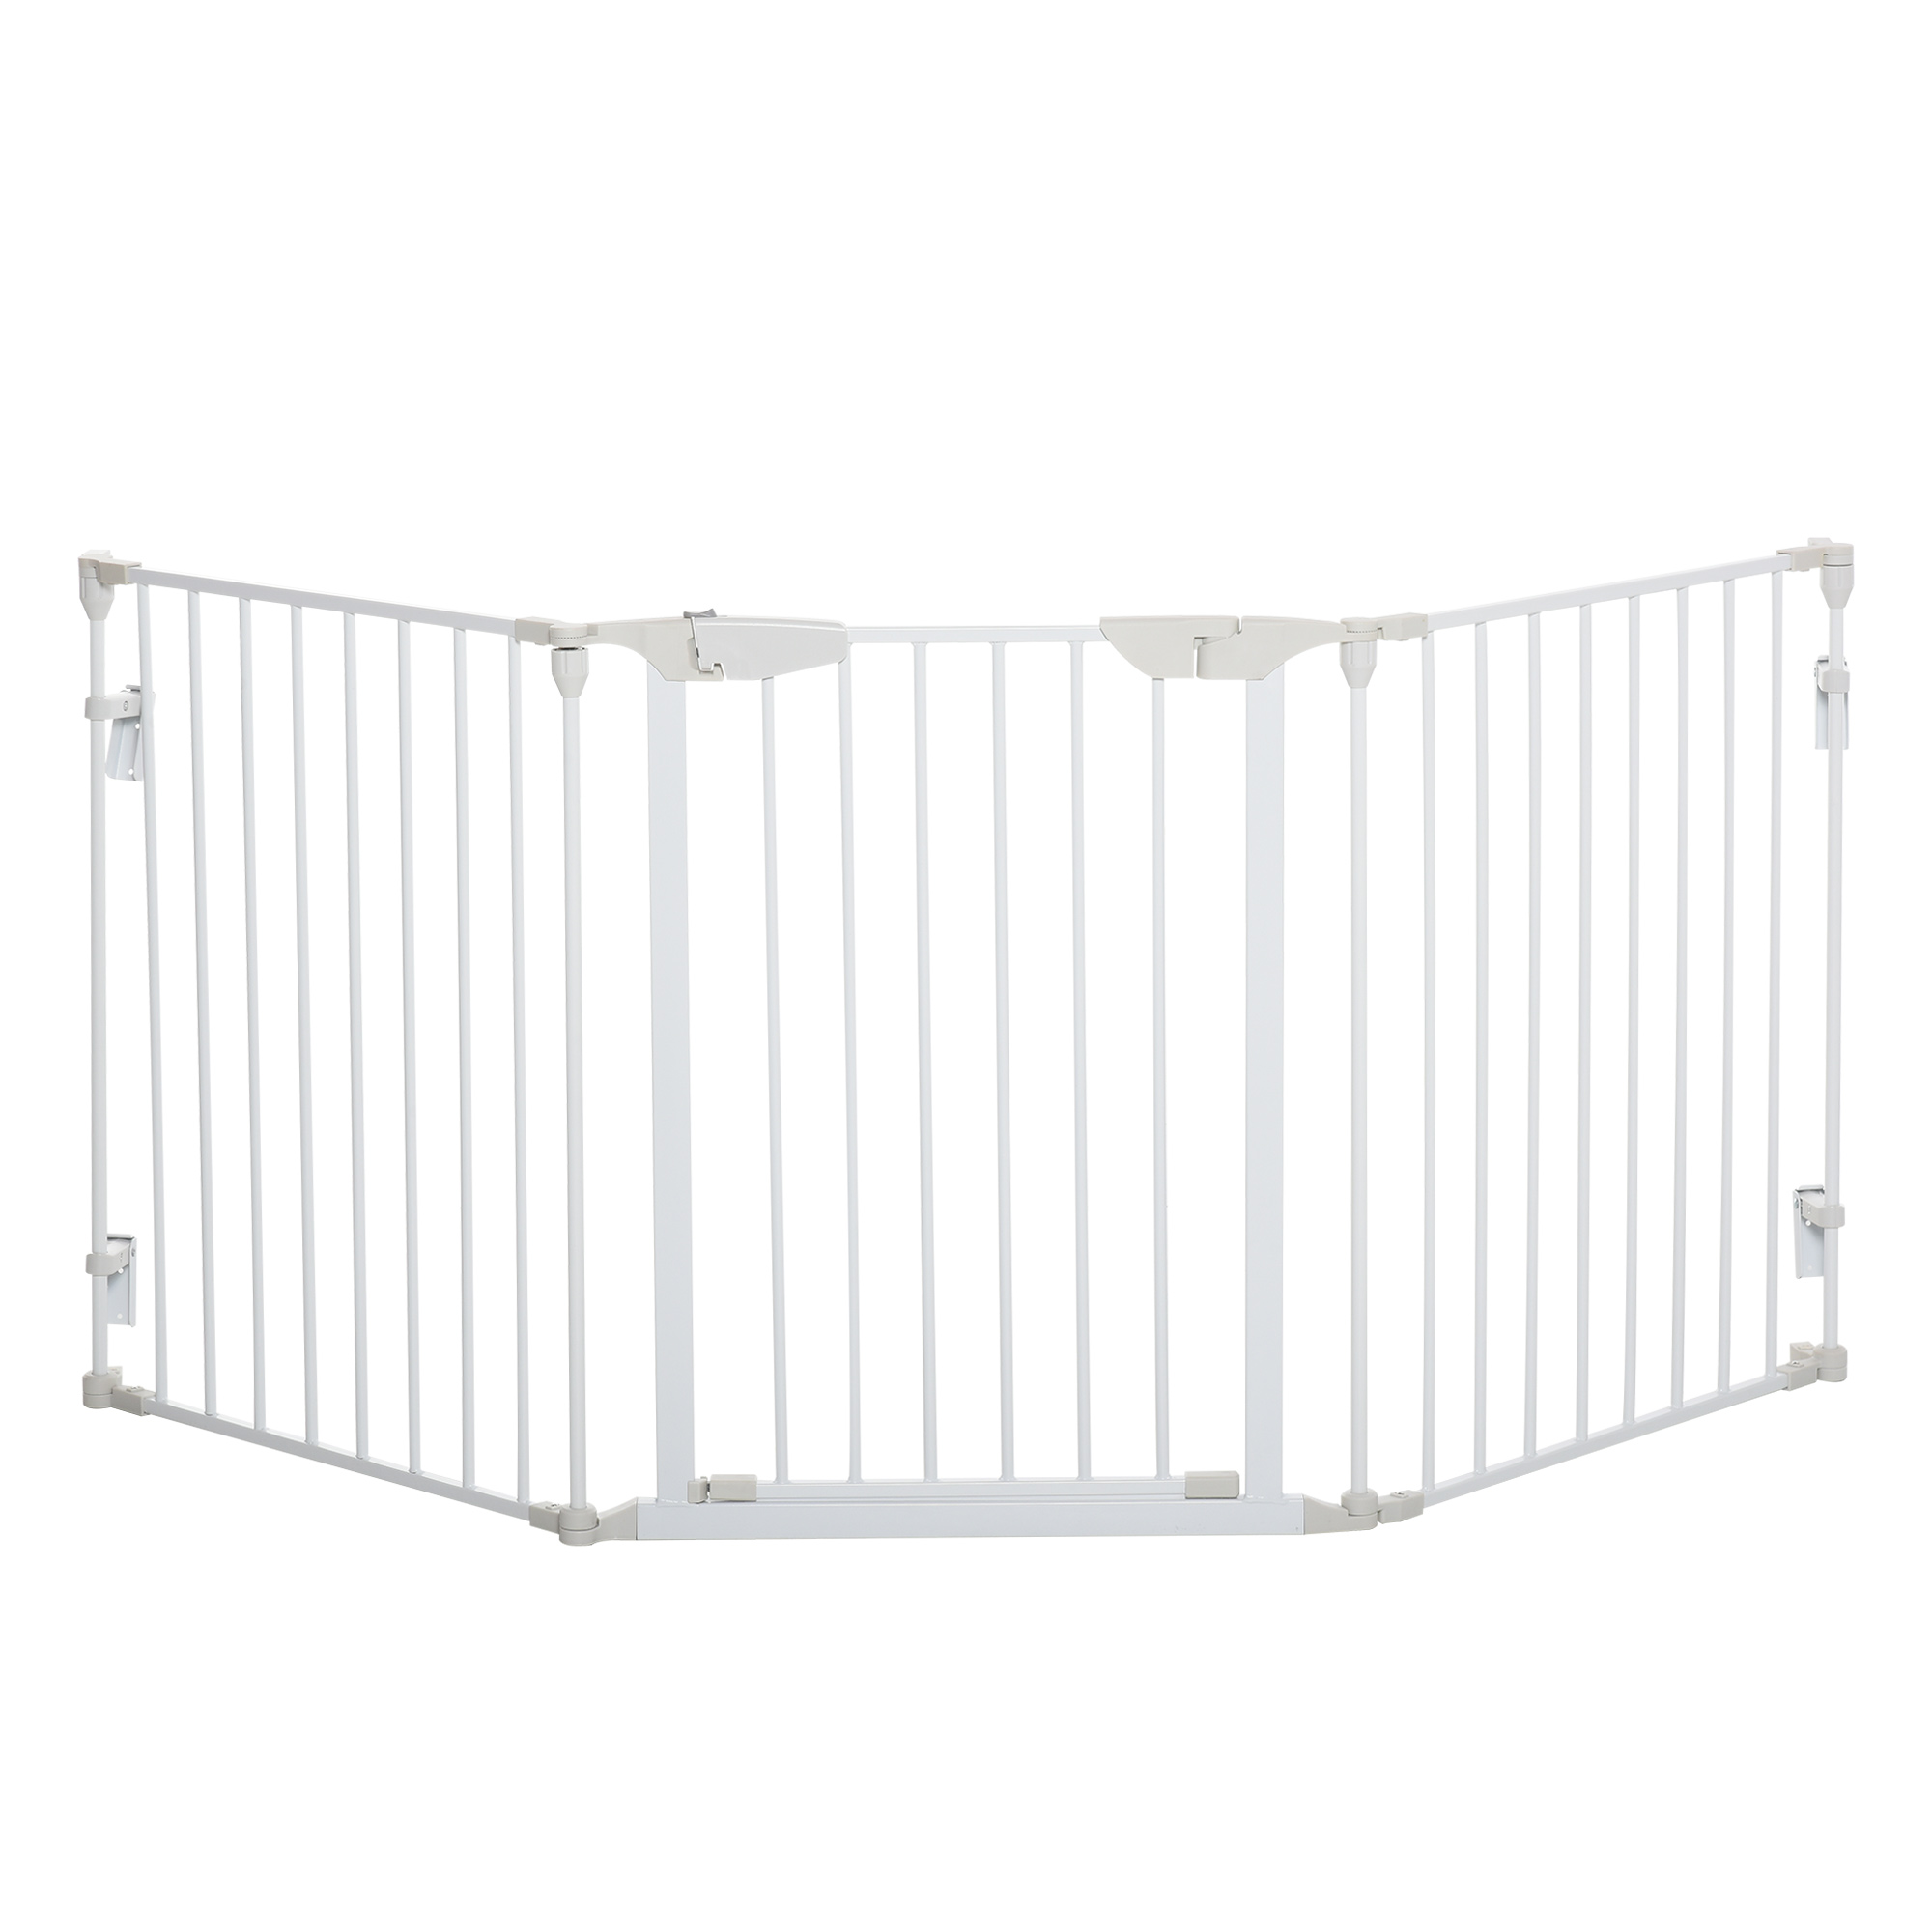 Pawhut Pet Safety Gate 3-panel Playpen Fireplace Christmas Tree Metal Fence Stair Barrier Room Divider W/walk Through Door, White